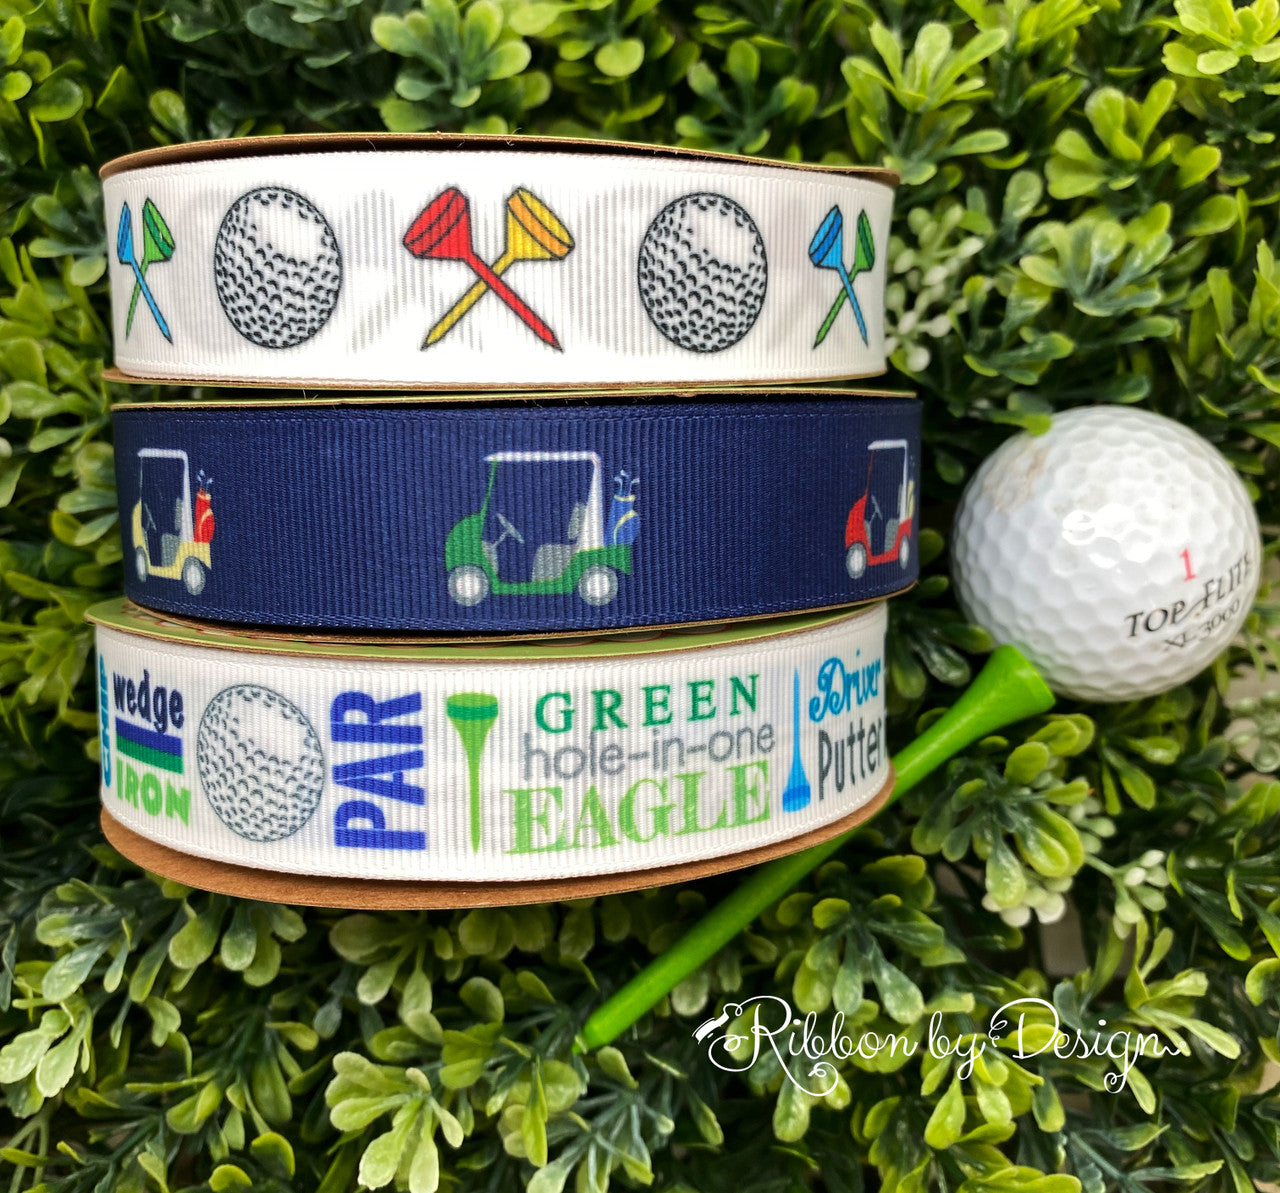 We have three grosgrain golf ribbons to mix and match for your next golf themed party!